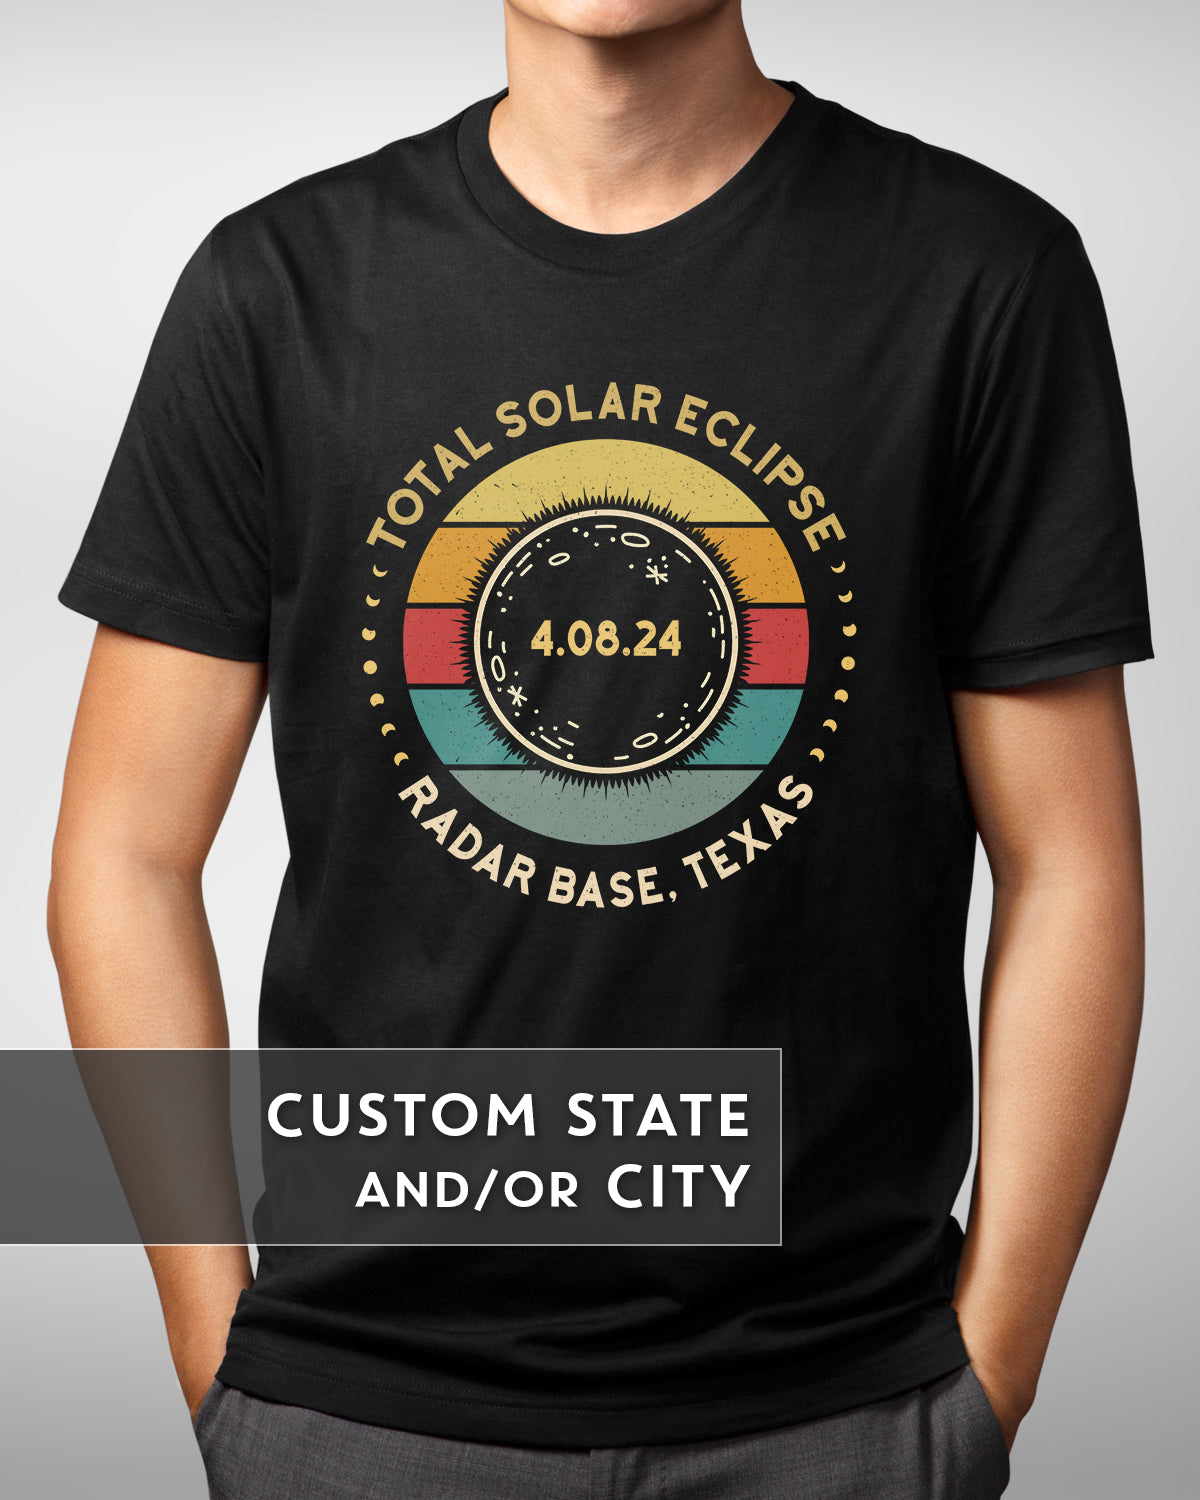 2024 Solar Eclipse Shirt, Customized State & City Vintage Design, Family Matching Totality Viewing Tee, 4.08.24 Astronomical Event